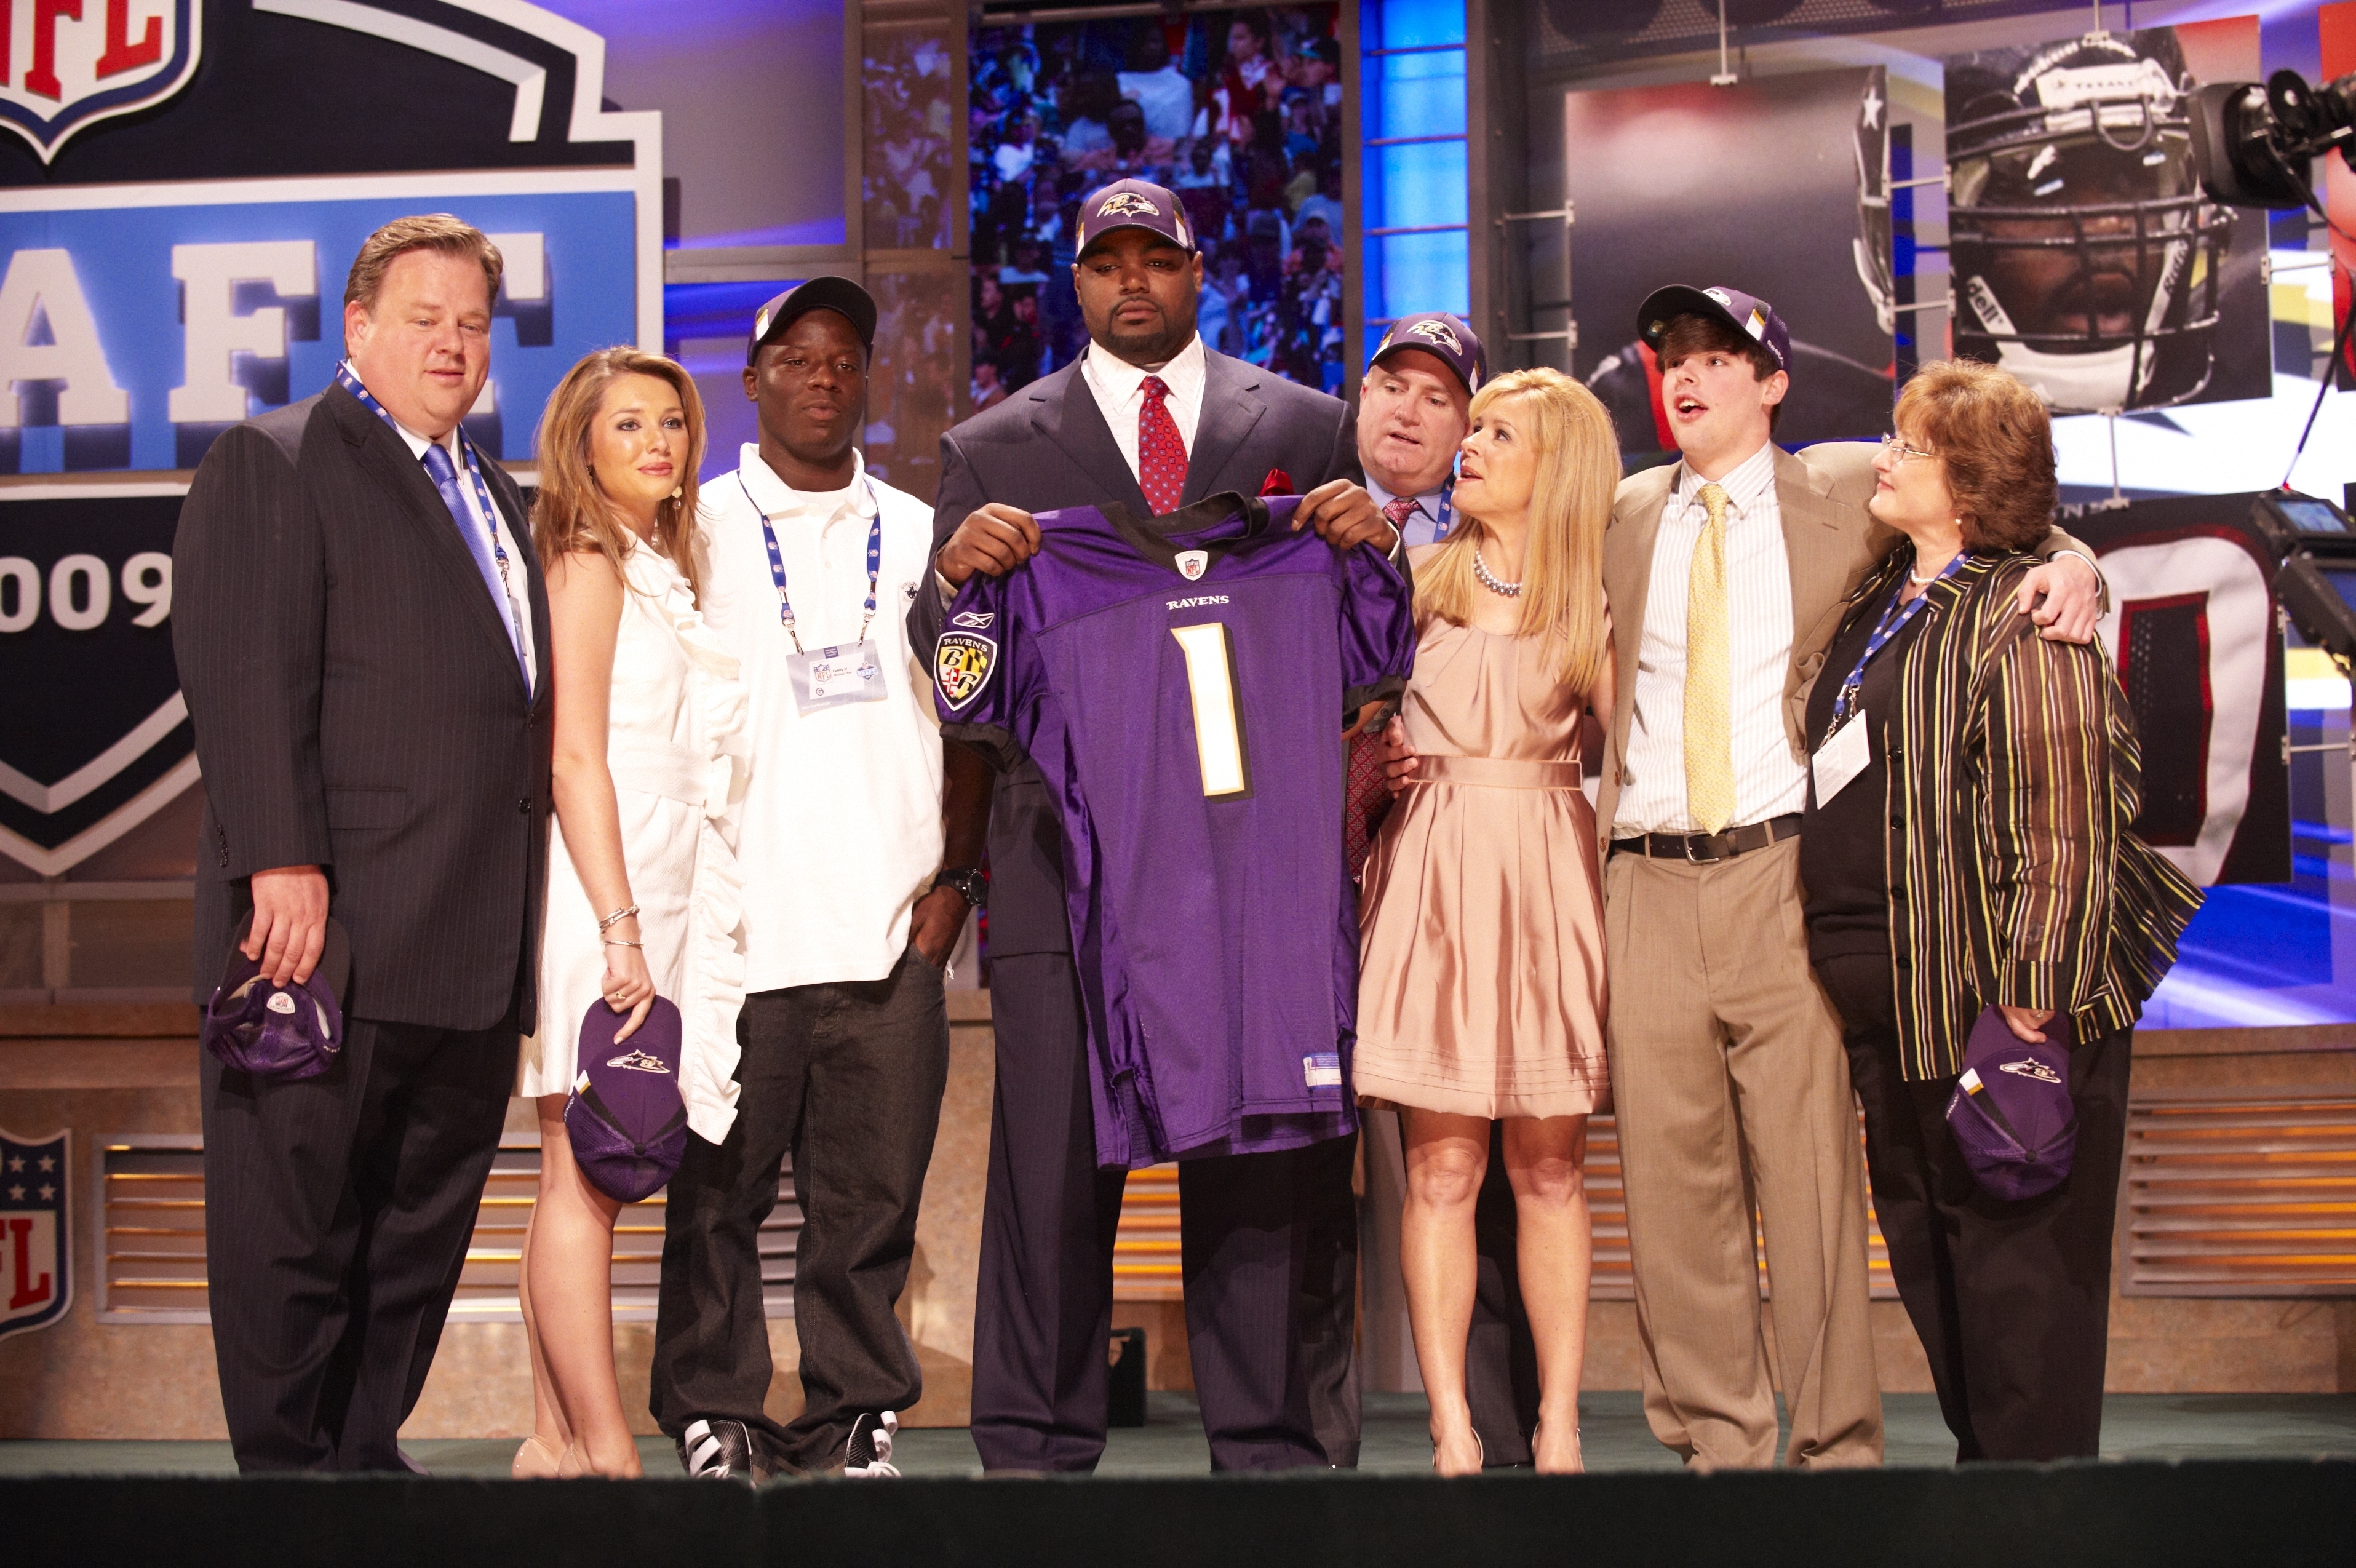 Michael with the Tuohys at the NFL draft